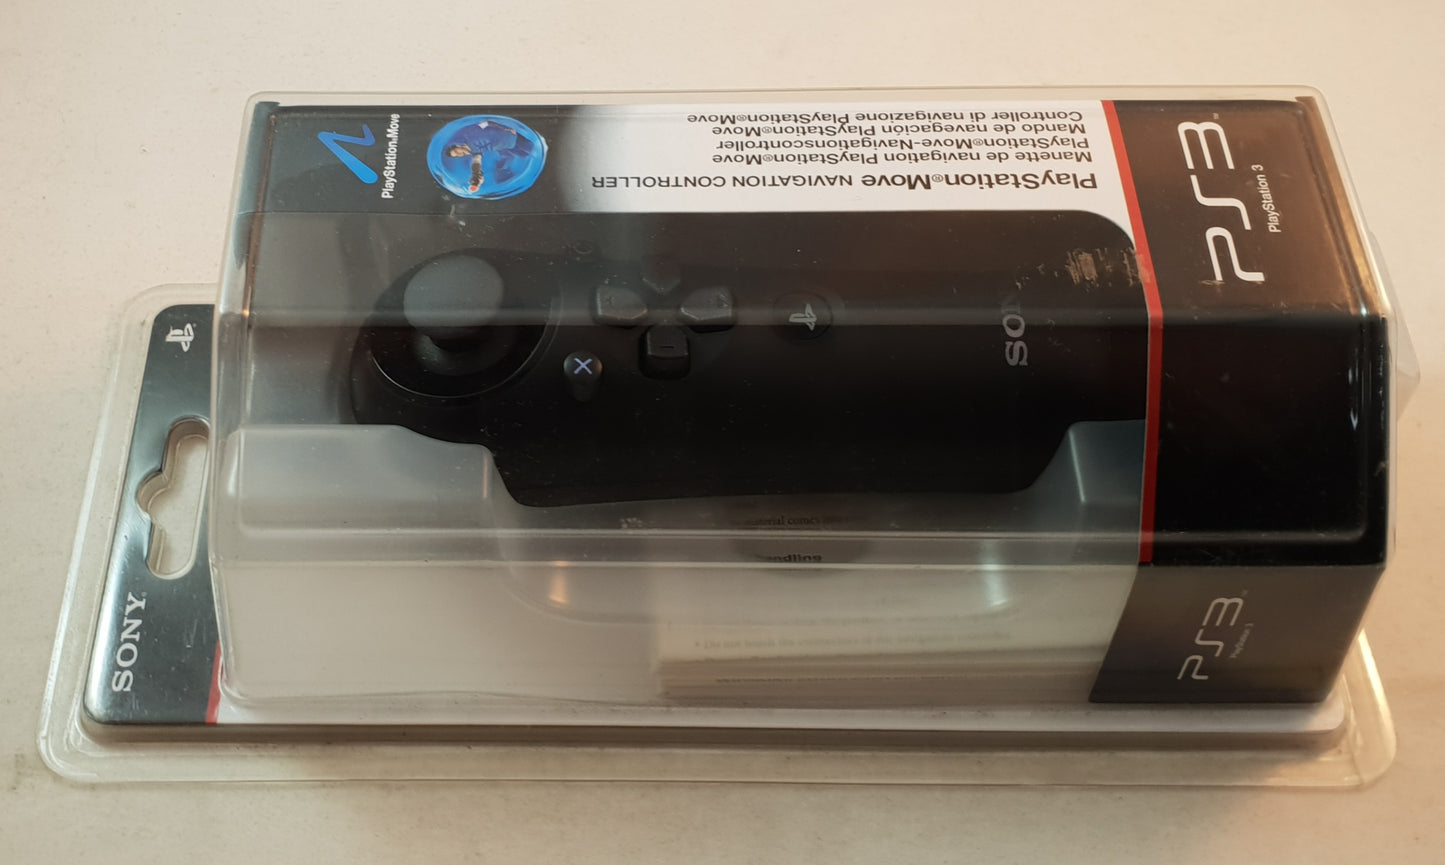 Brand New and Sealed Playstation Move Navigation Controller Playstation 3 (PS3) Accessory